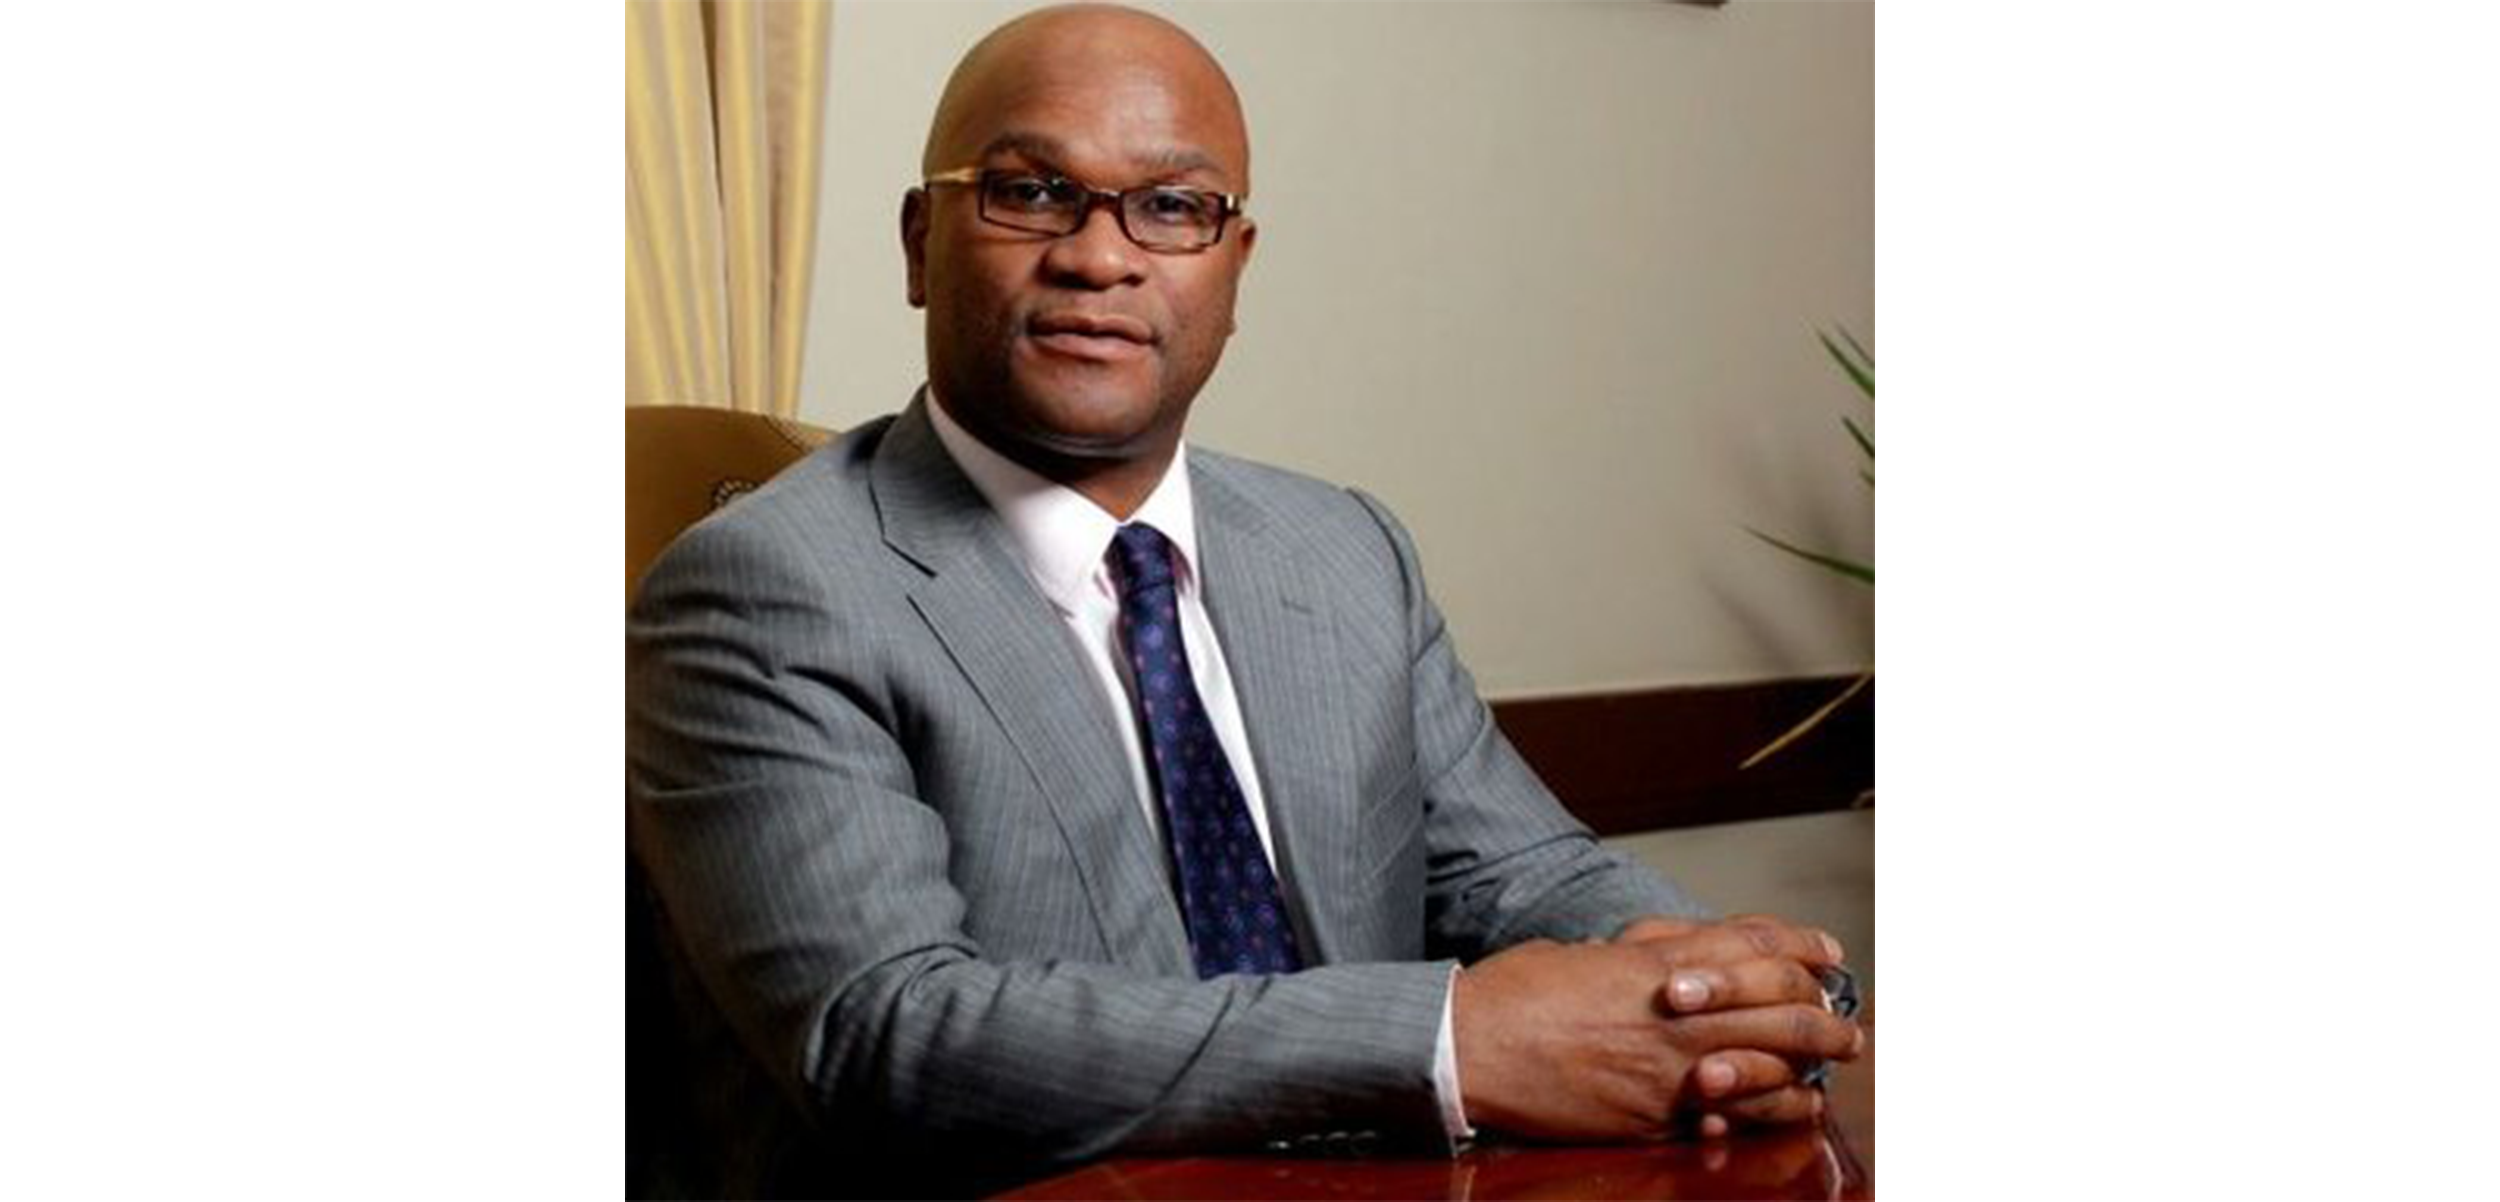 CSA: Joint meeting between the Interim Board, the Members’ Council and Minister of Sports, Arts and Culture Nathi Mthethwa